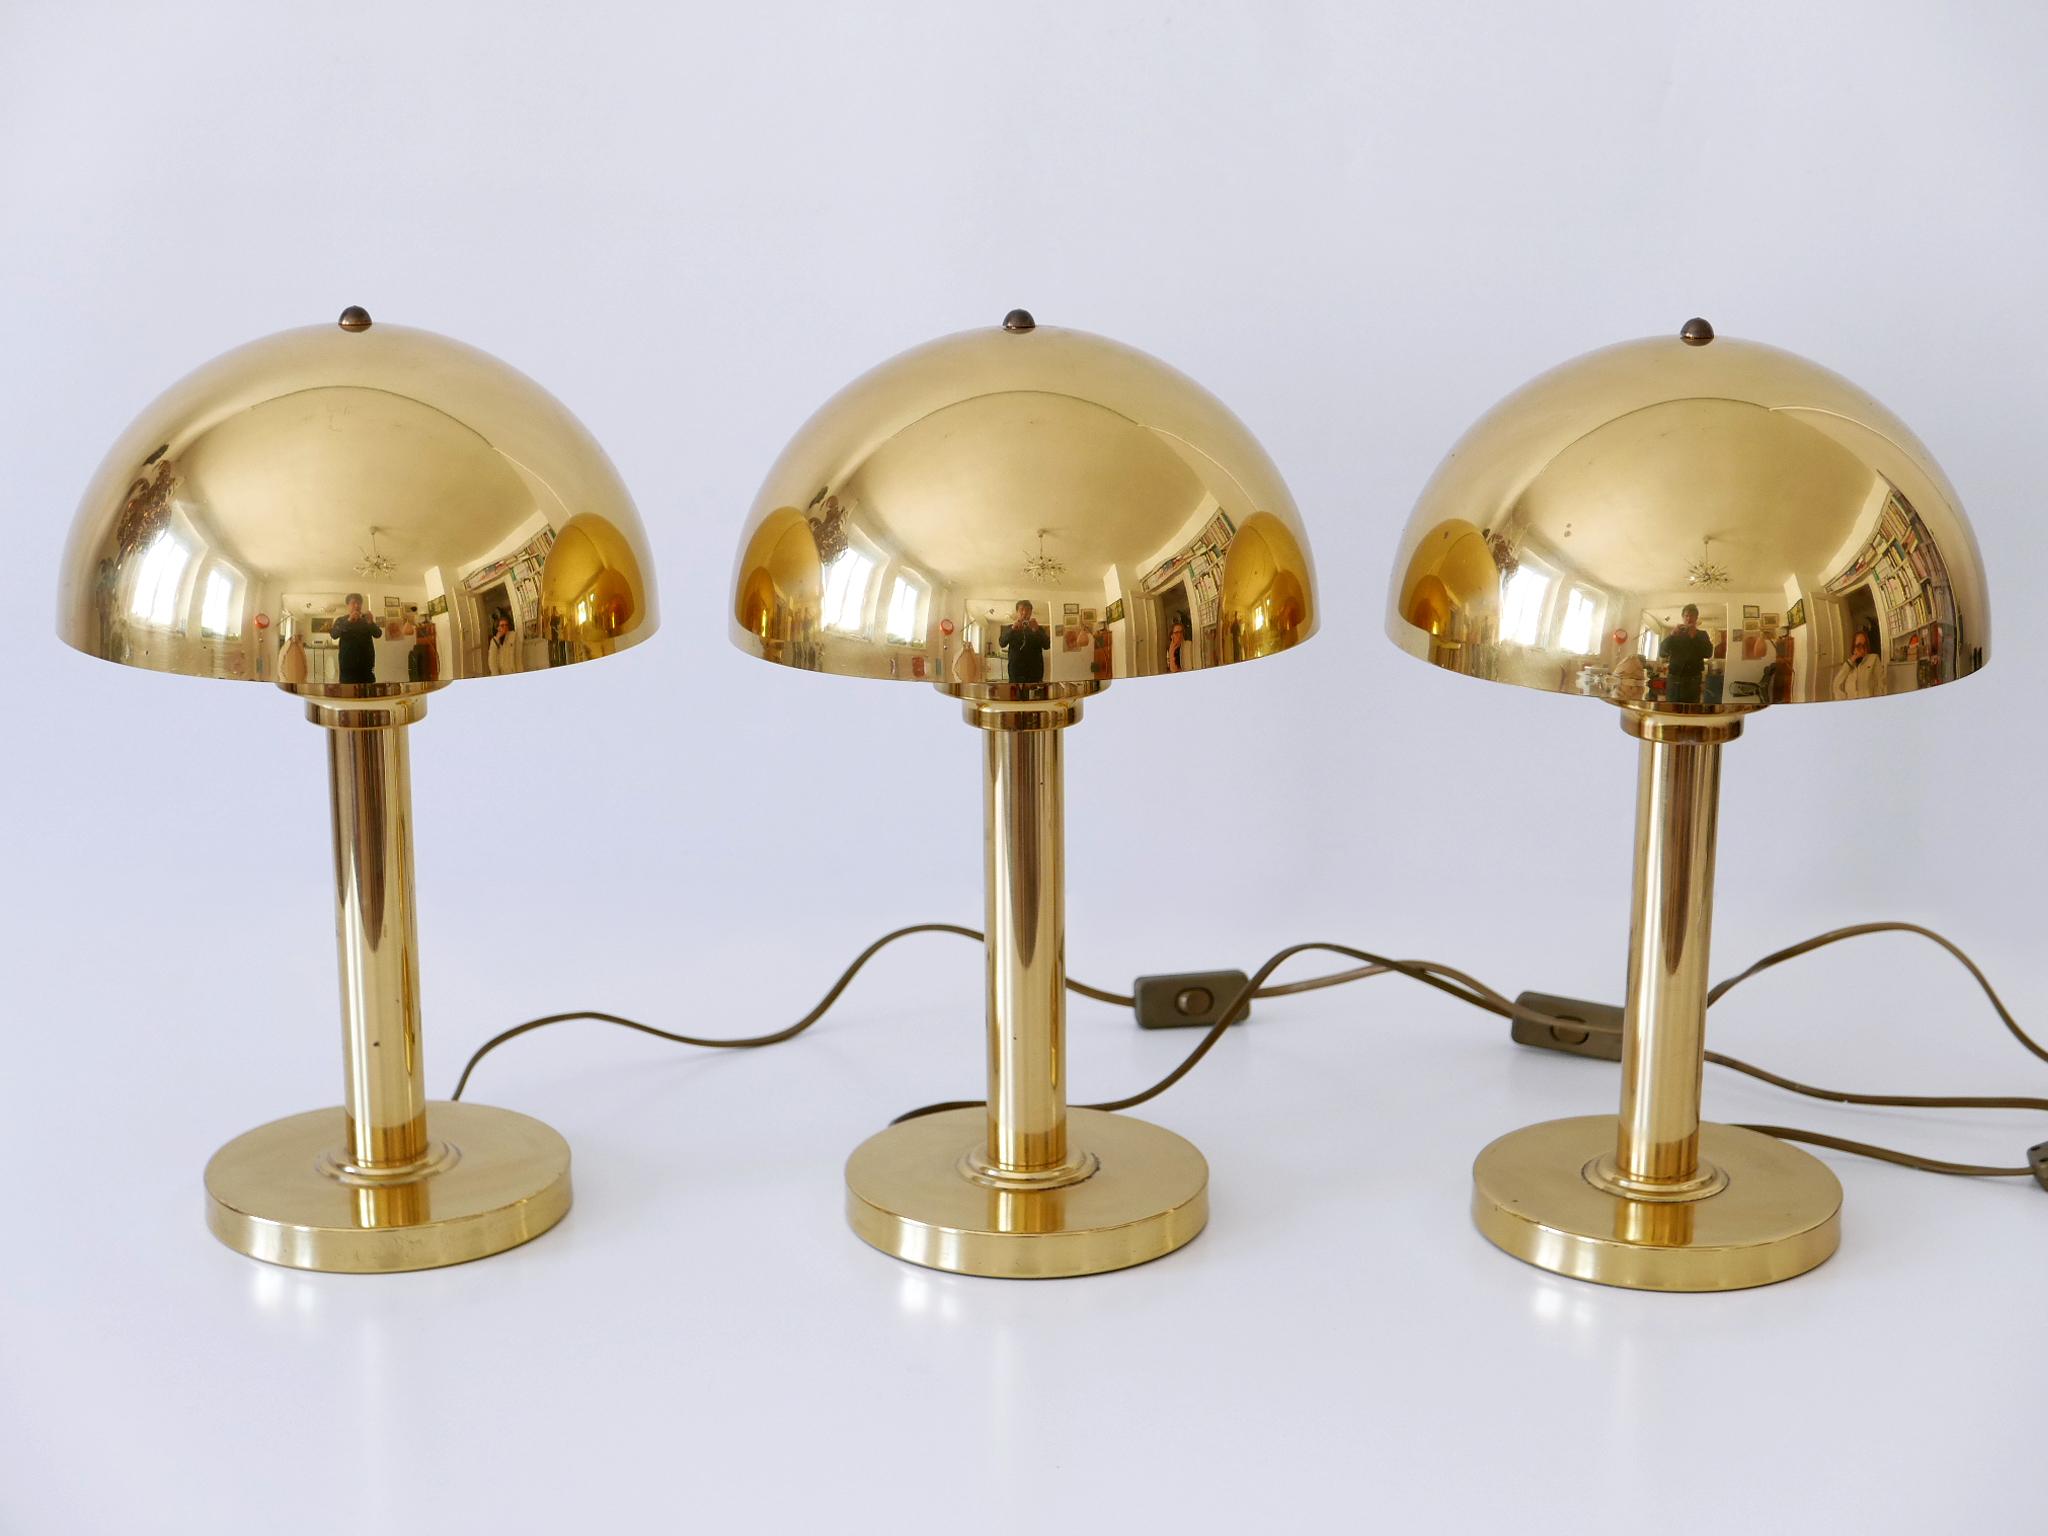 Polished Elegant Mid-Century Modern Brass Table Lamps by WSB, Germany, 1960s For Sale